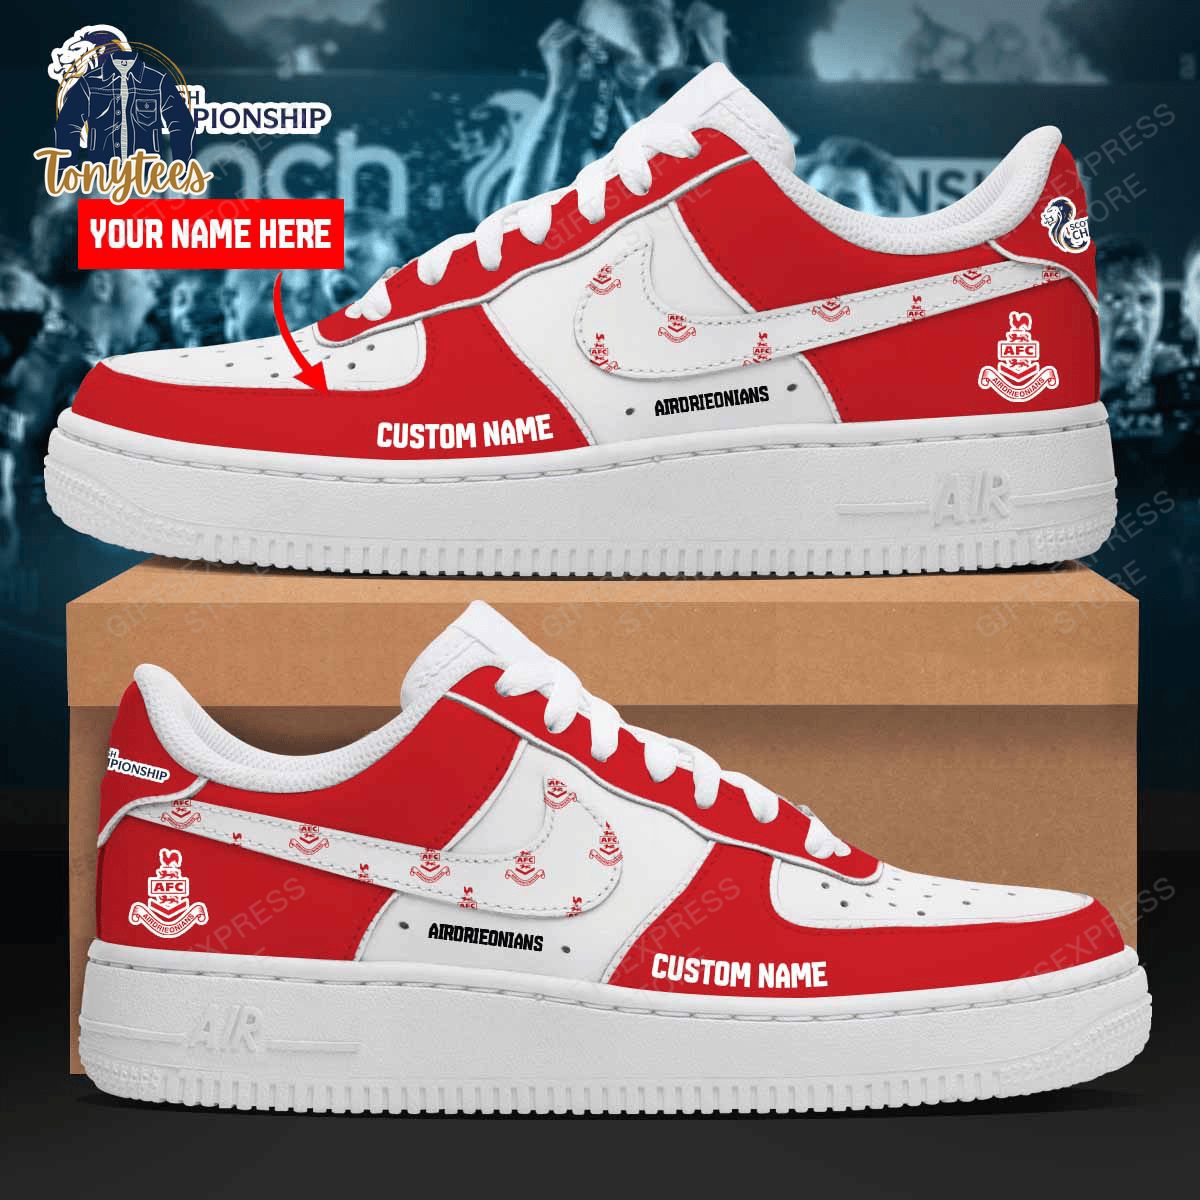 Airdrieonians Custom Name Air Force 1 Sneaker